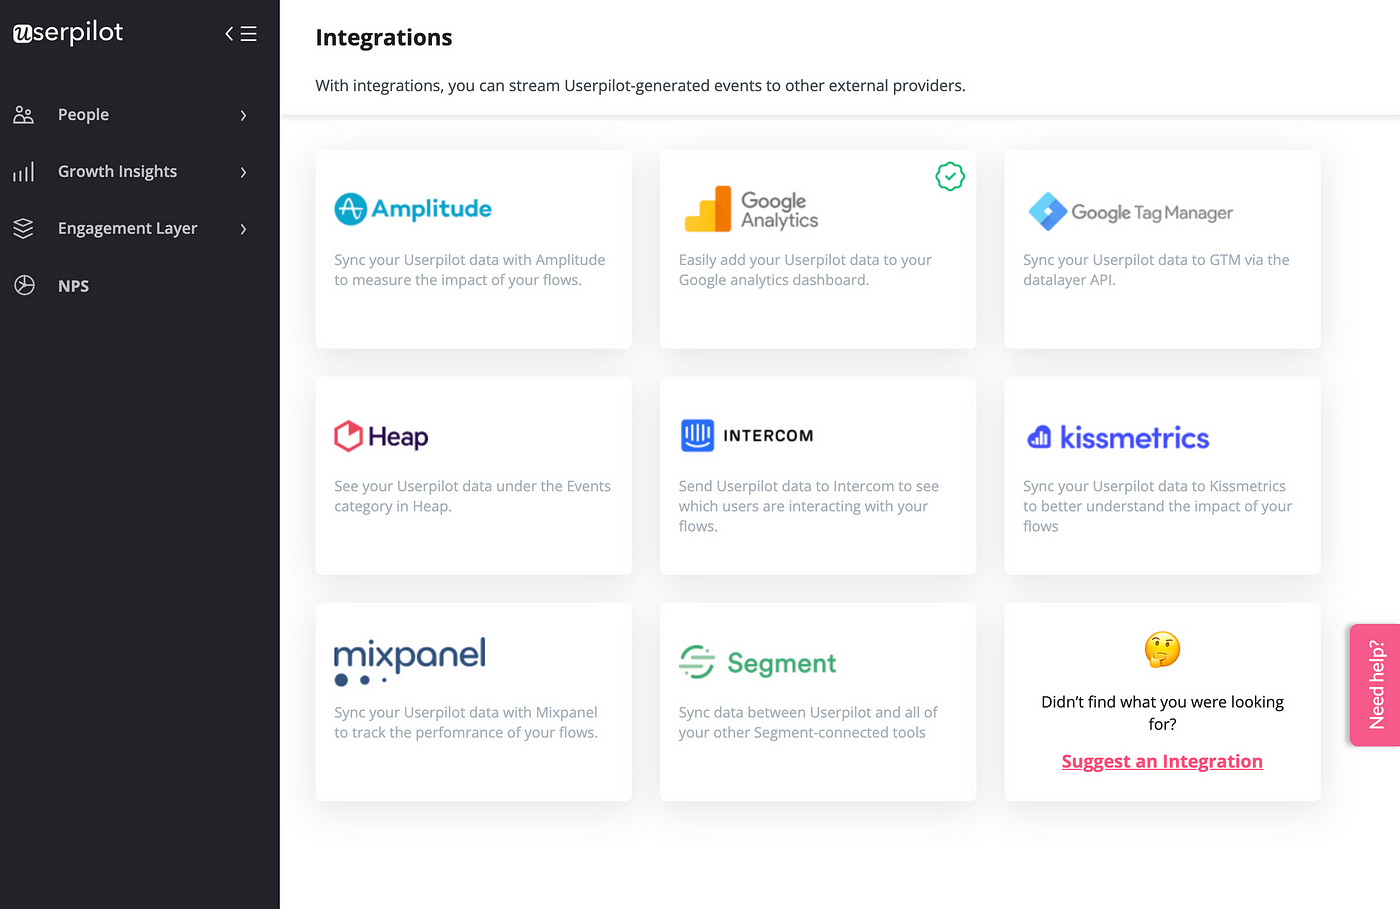 Userpilot integrations with other tools allow product operations to see all the data in one place.